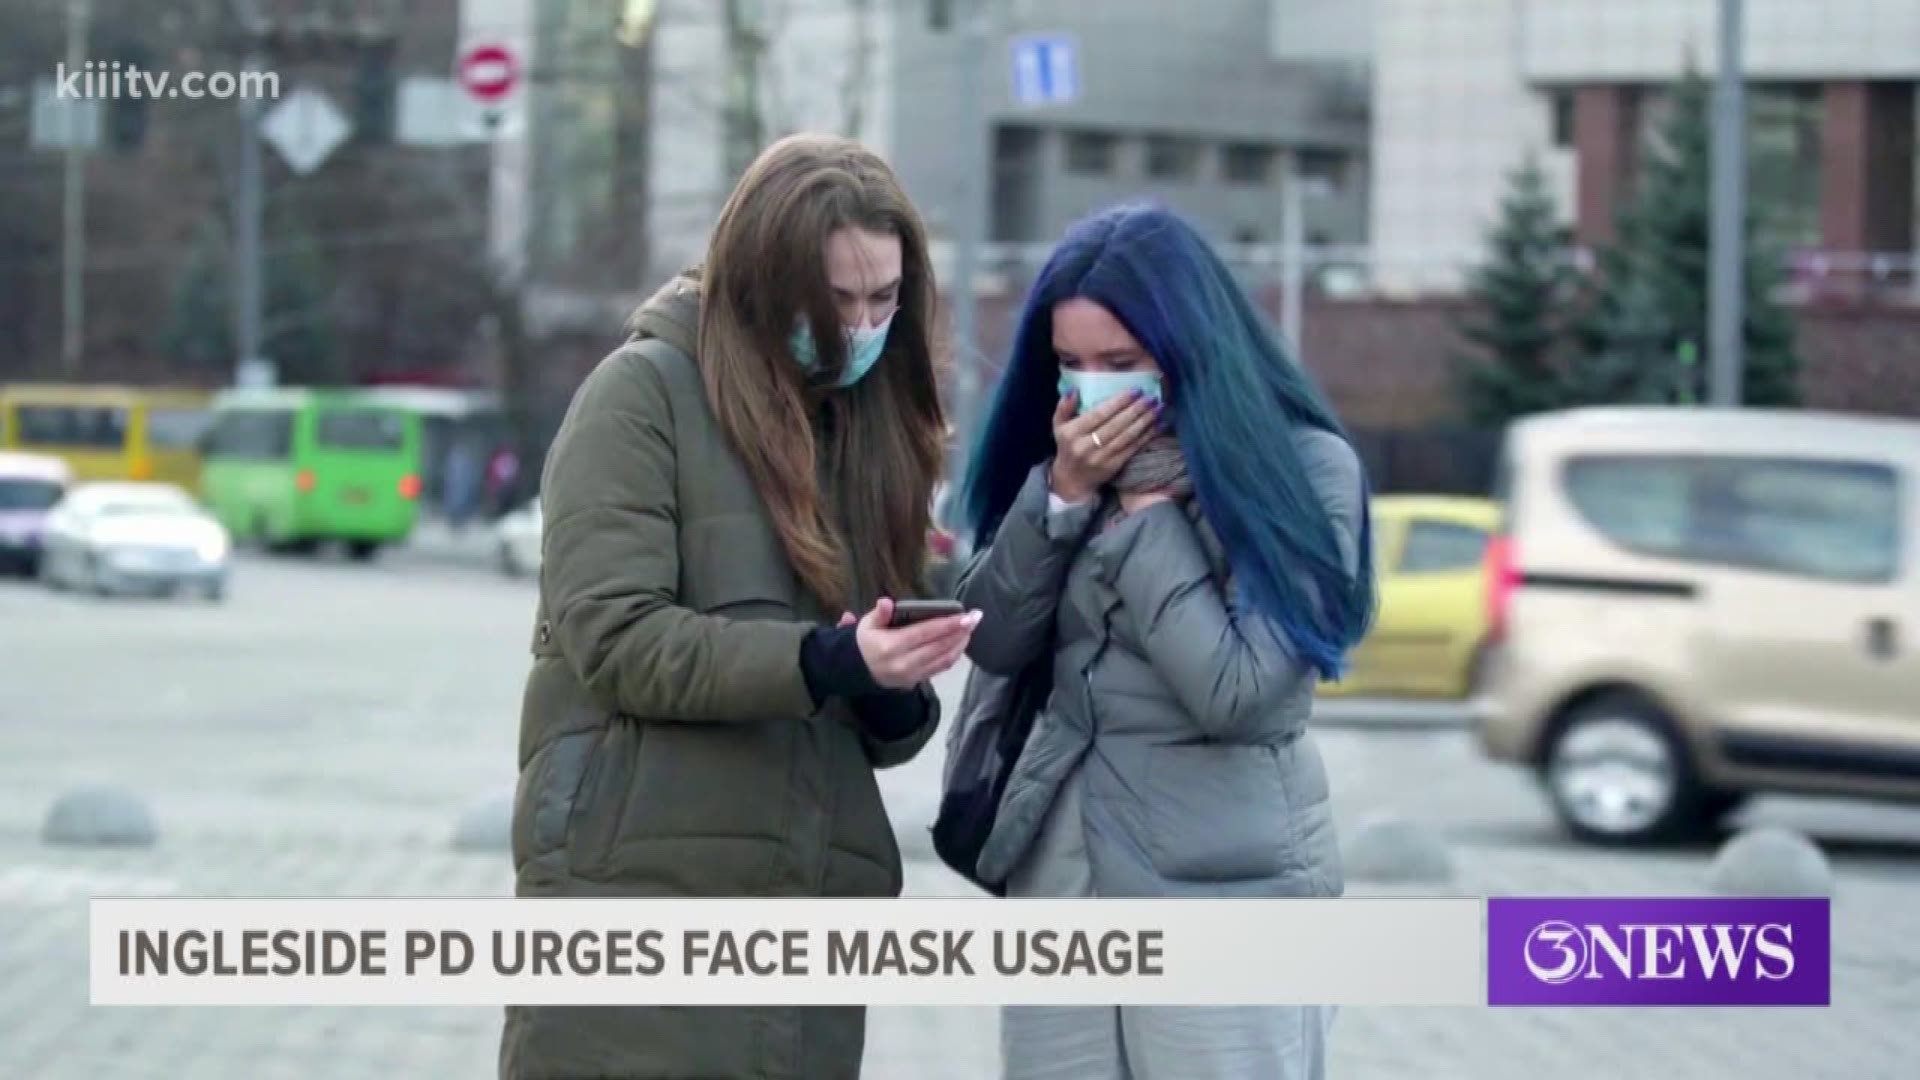 The Police Department is asking businesses, residents and visitors to voluntary wear face masks in public.